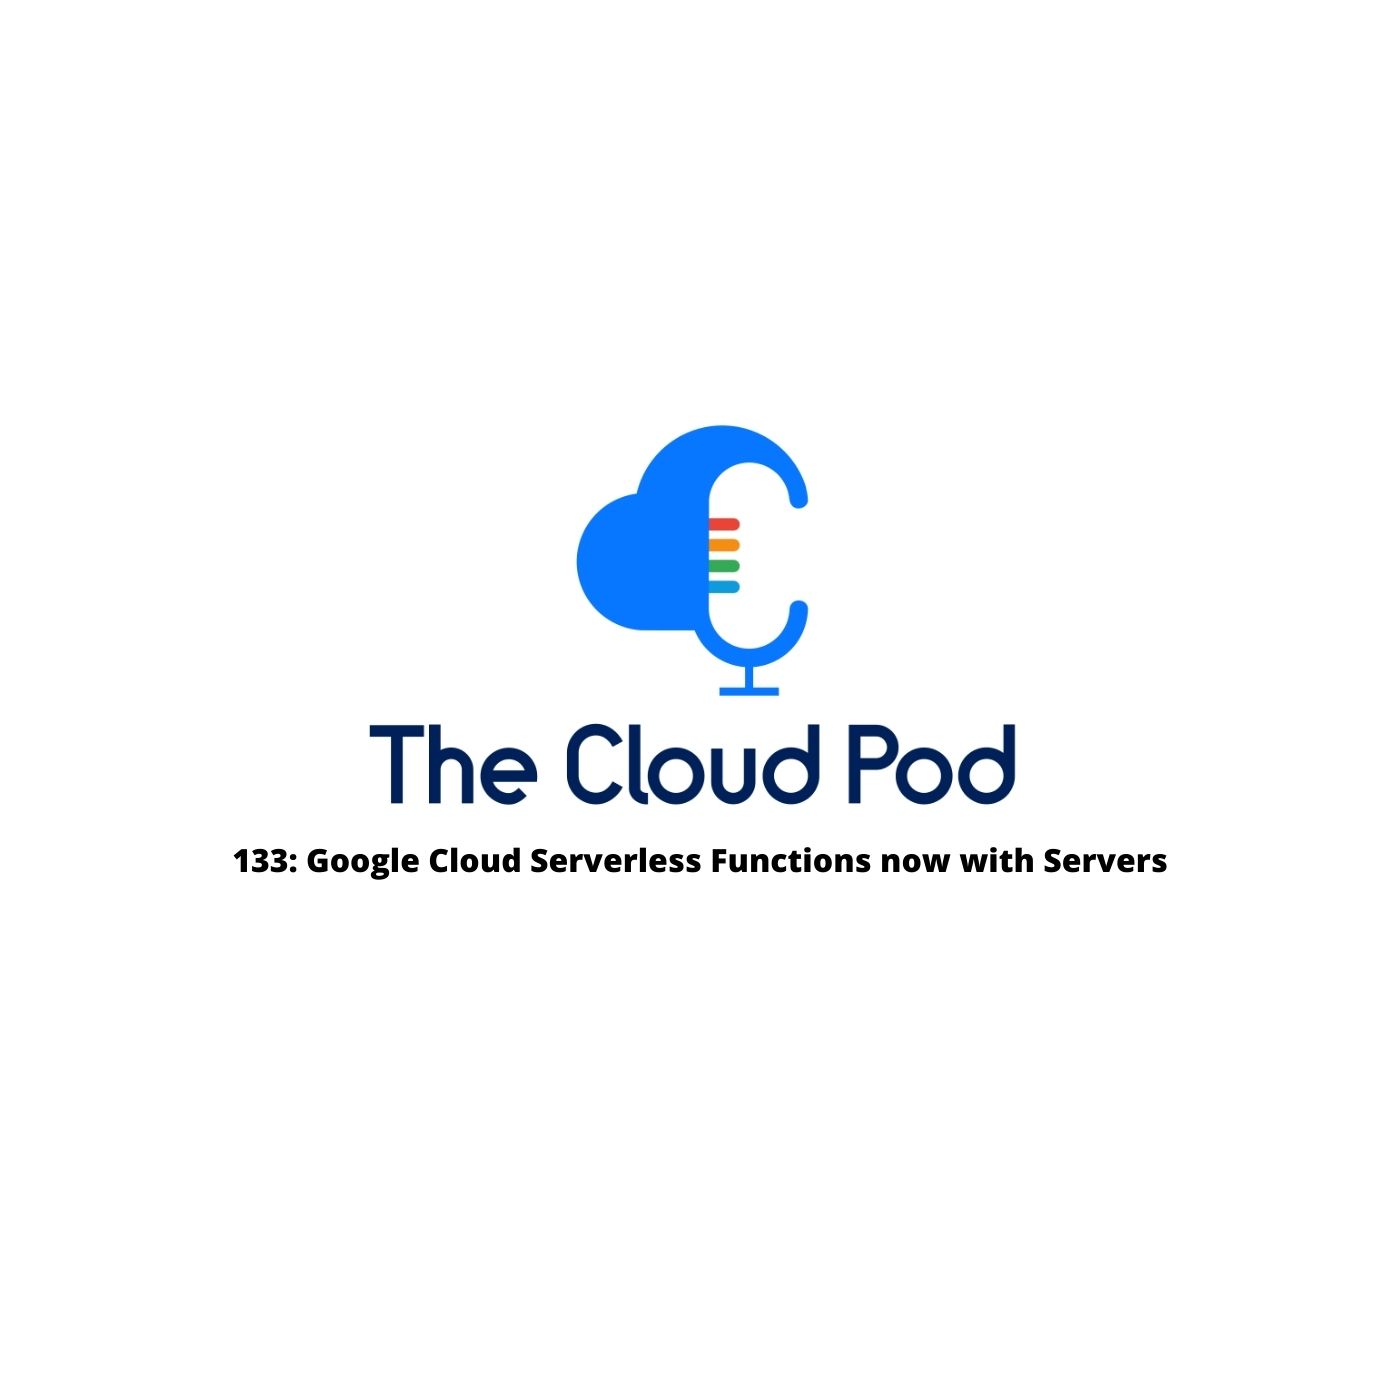 133: Google Cloud Serverless Functions now with Servers